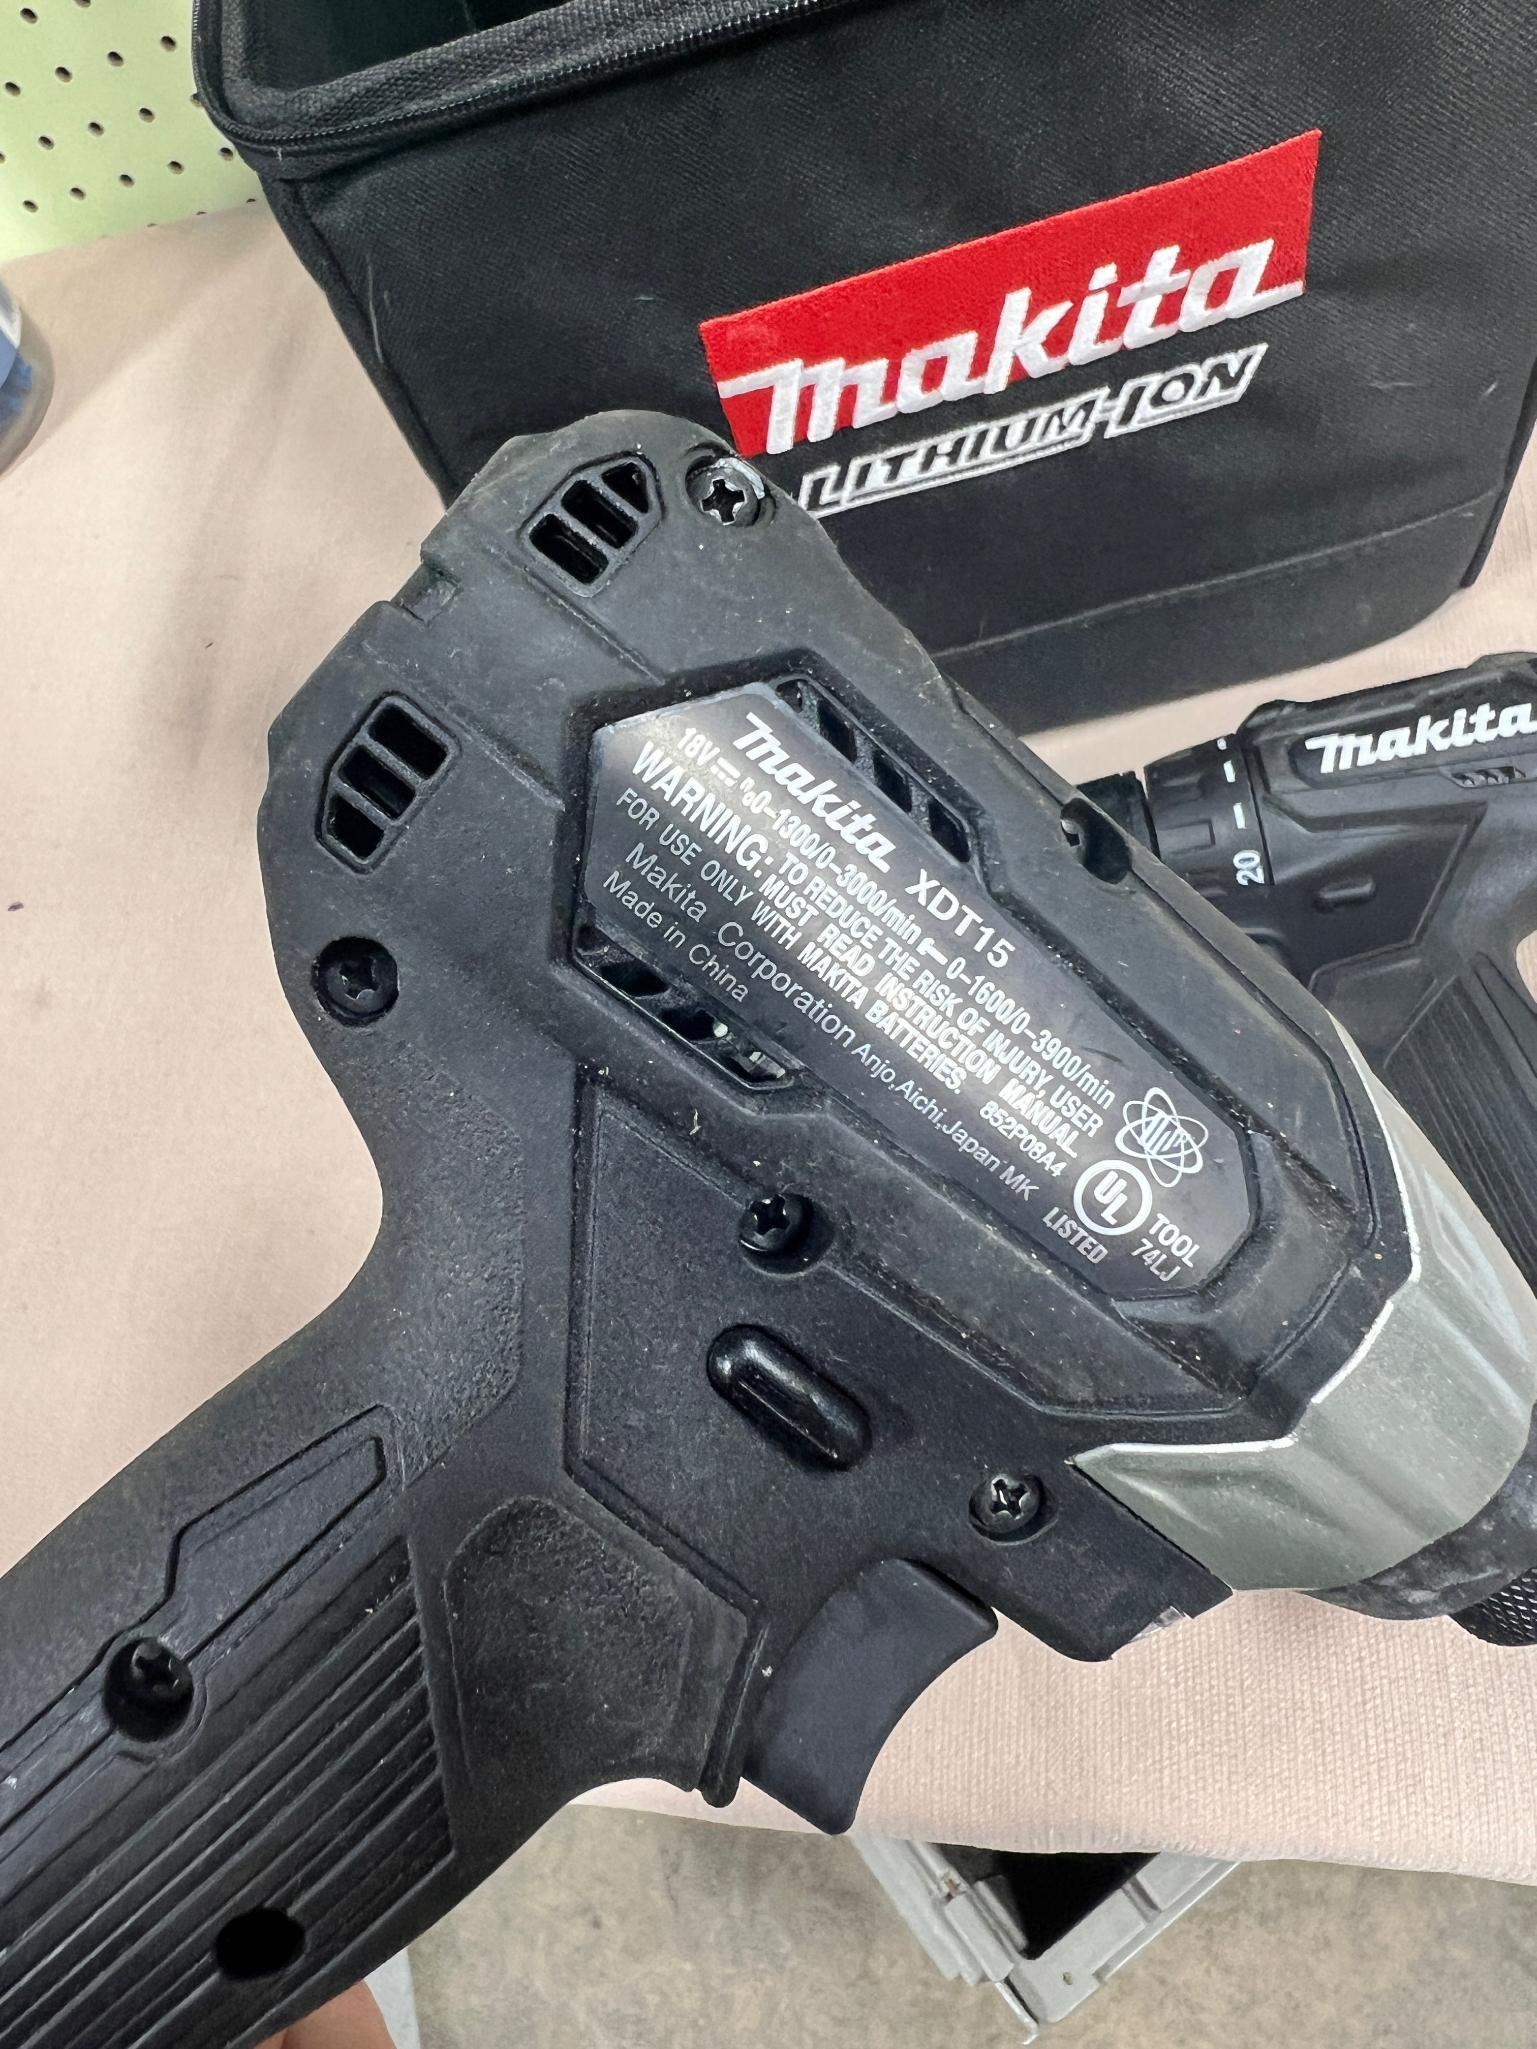 Makita carry bag w/ 18v Drill and Impact Driver, unused, XDT15 and XFD11